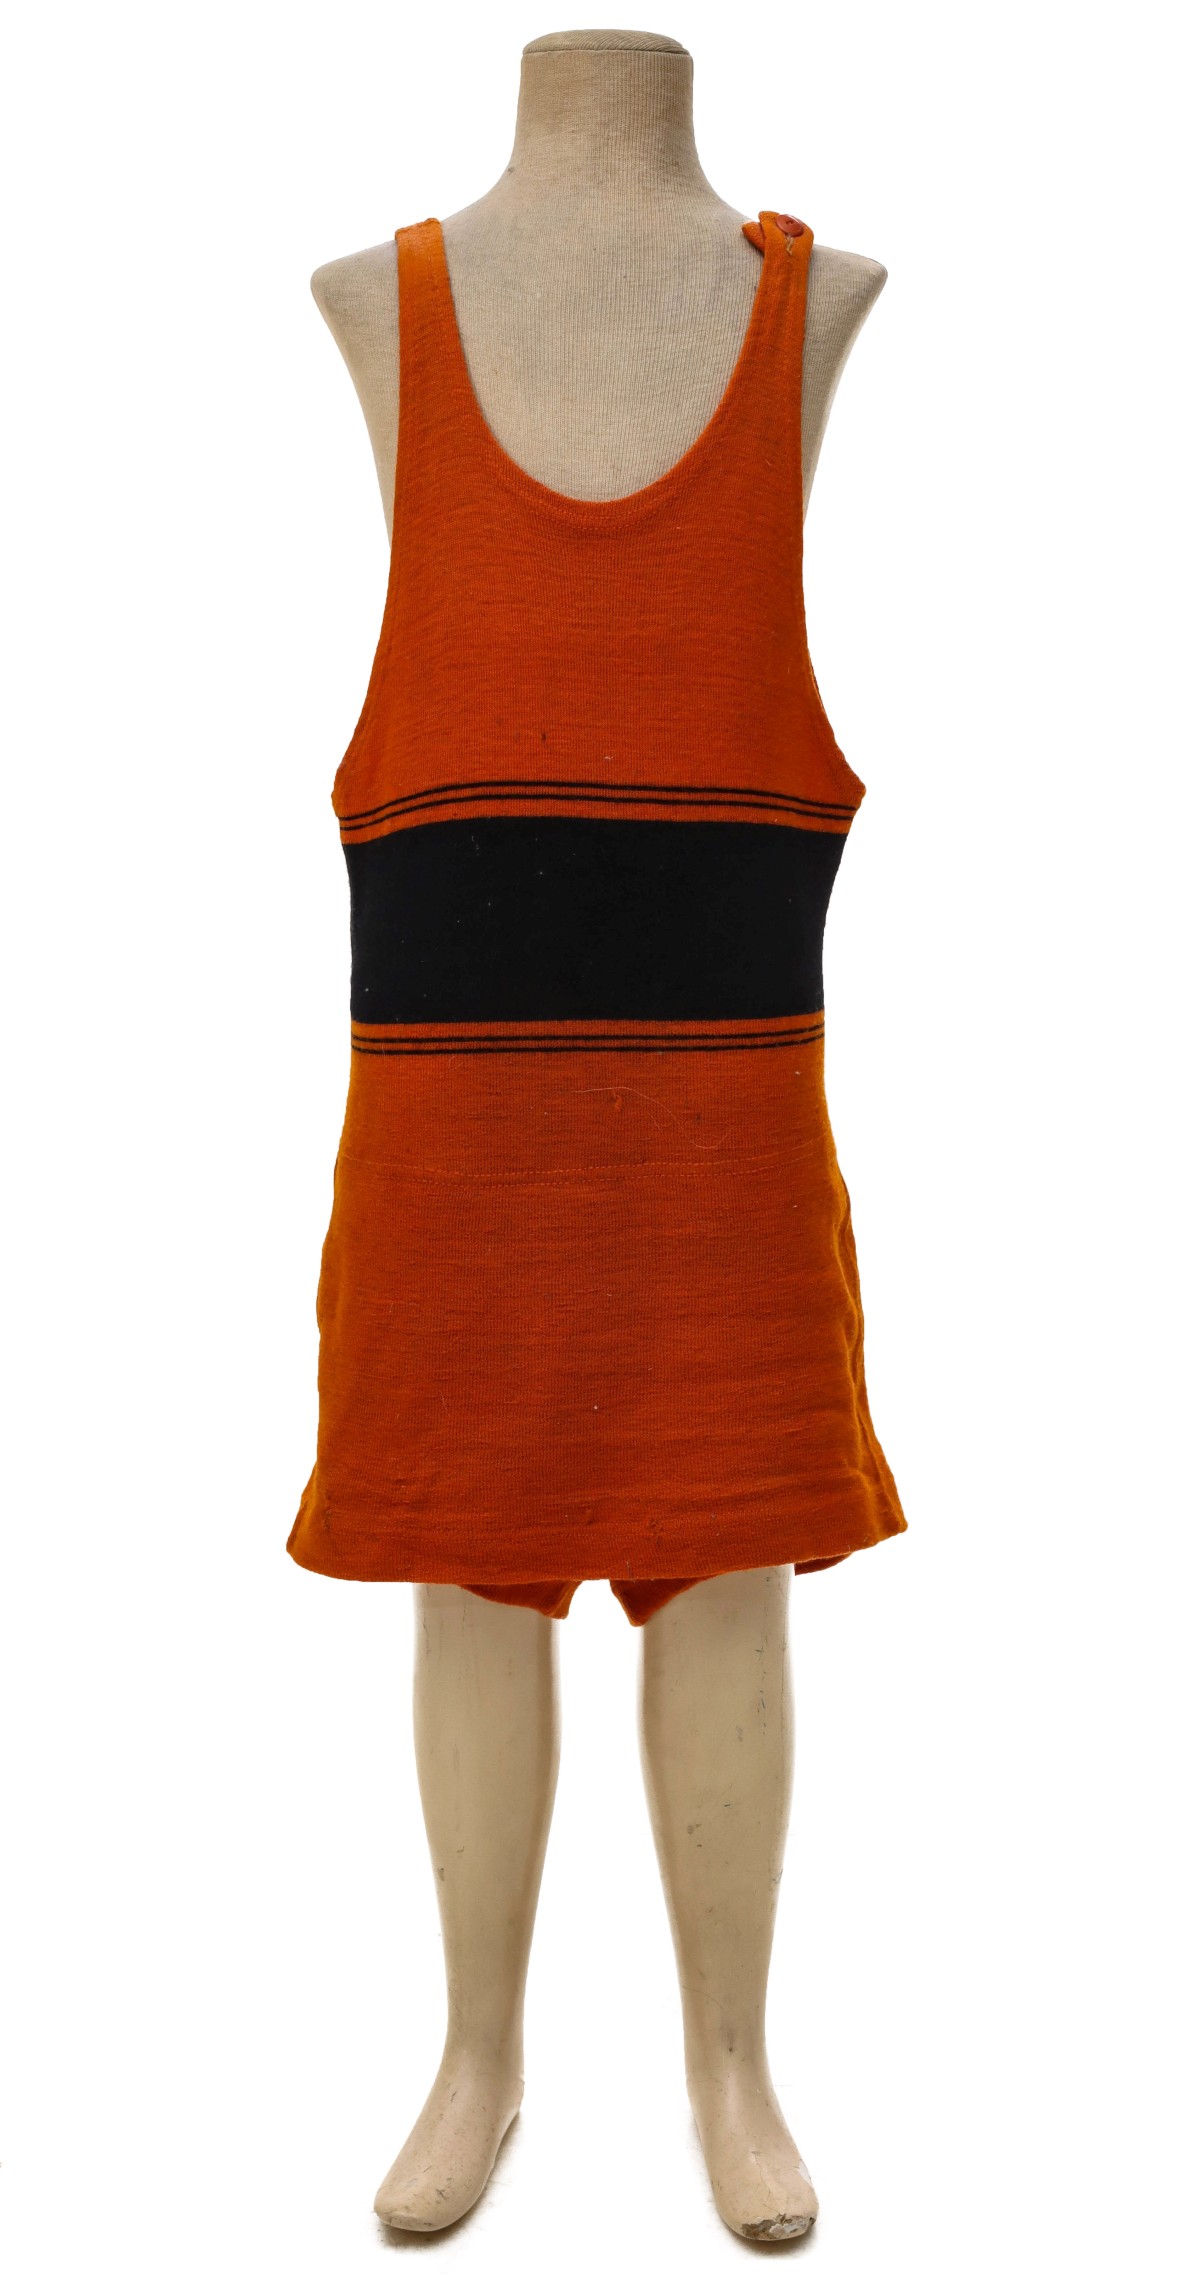 AN EARLY 20TH CENTURY YOUTH SIZE WOOL SWIMSUIT